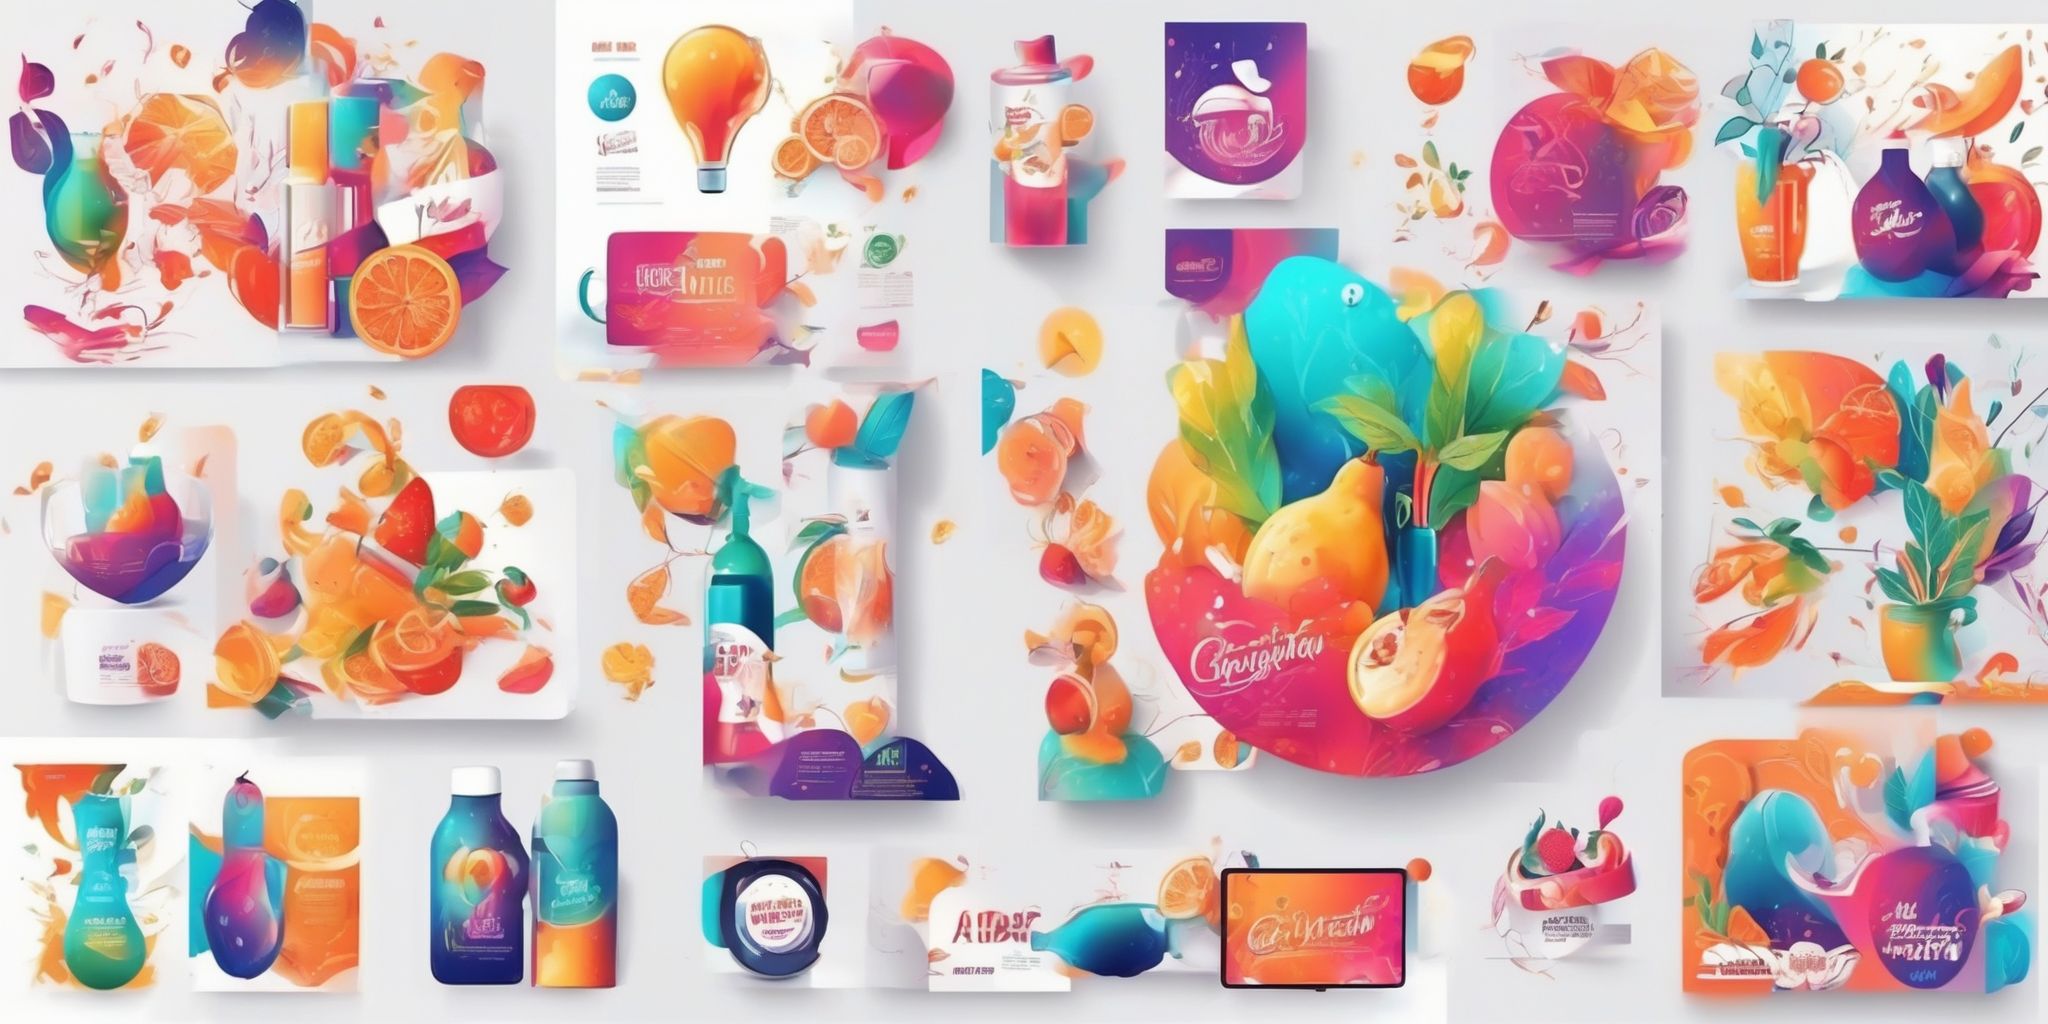 Advertising in illustration style with gradients and white background